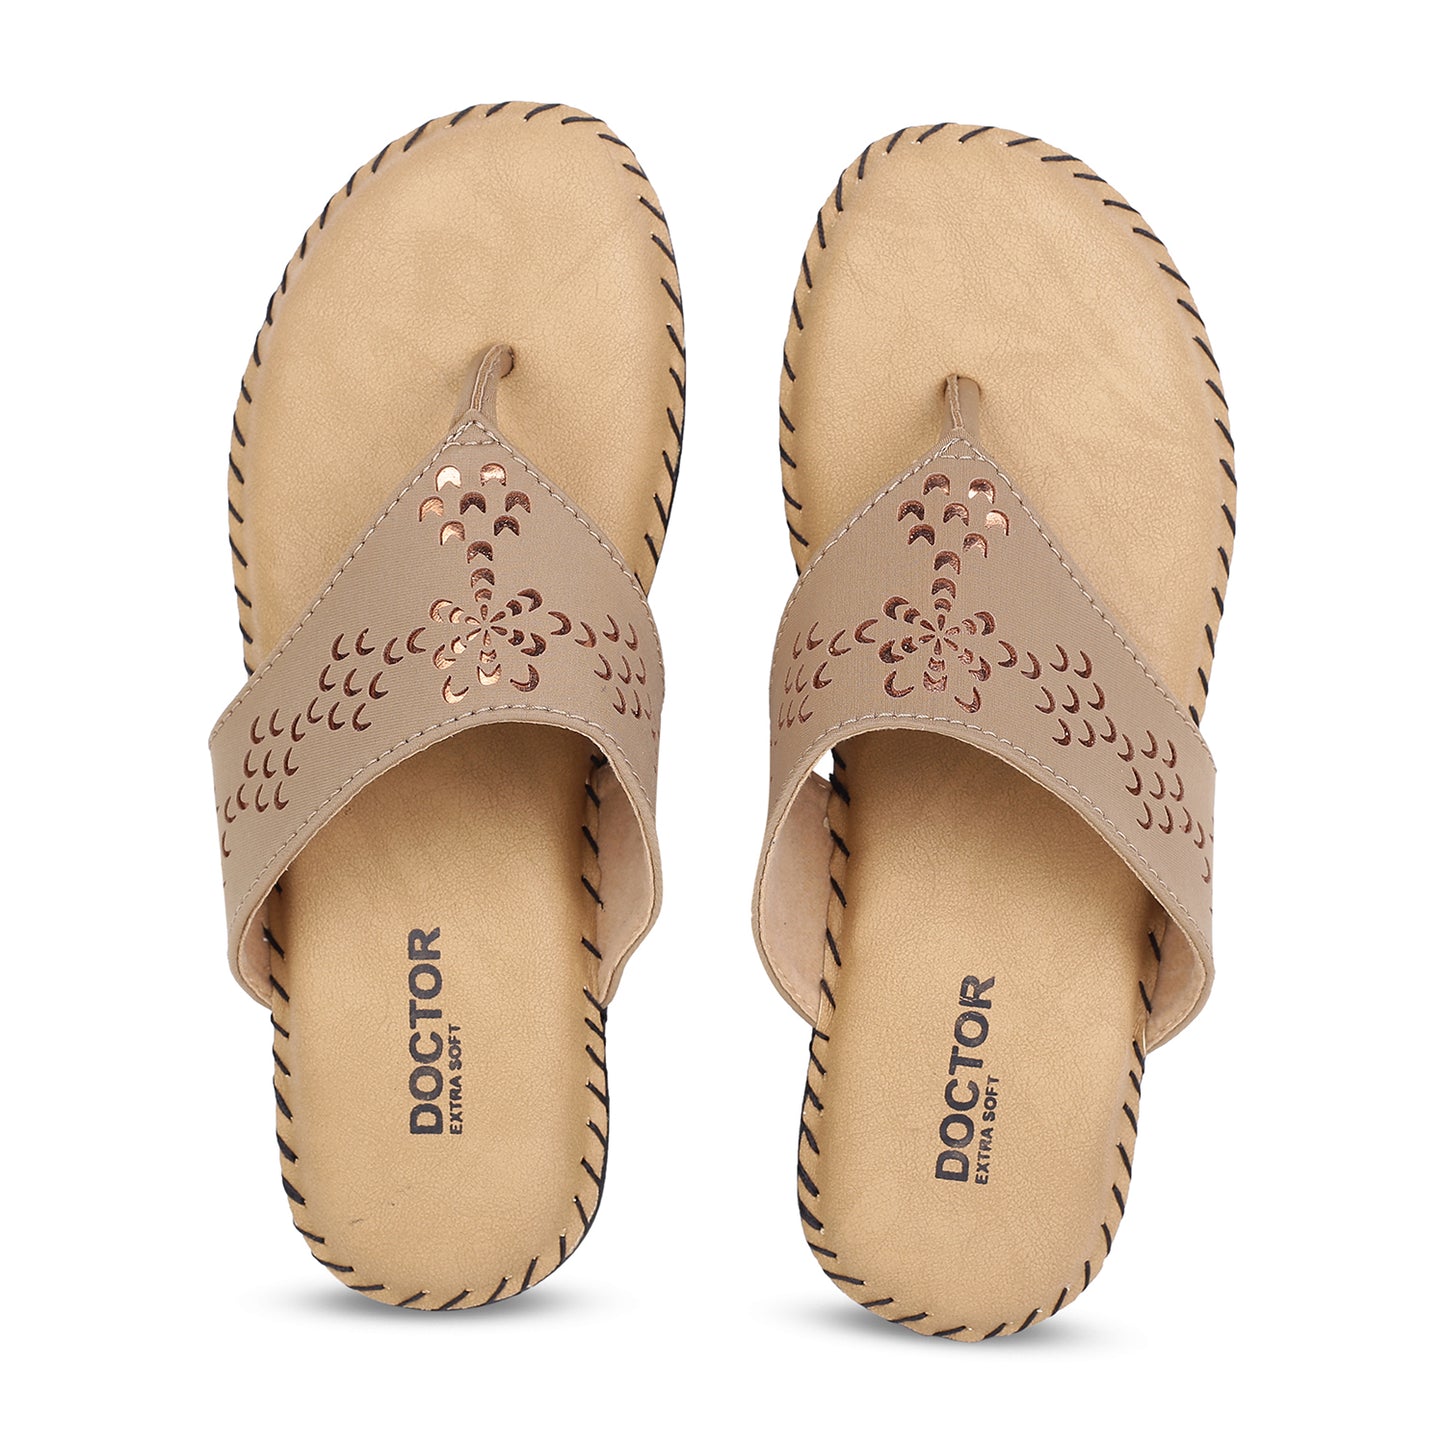 DOCTOR EXTRA SOFT ART-607 Women's Dr.Chappal For Ladies With Open Toe Style, Relaxing Footwear For Good Feet Health